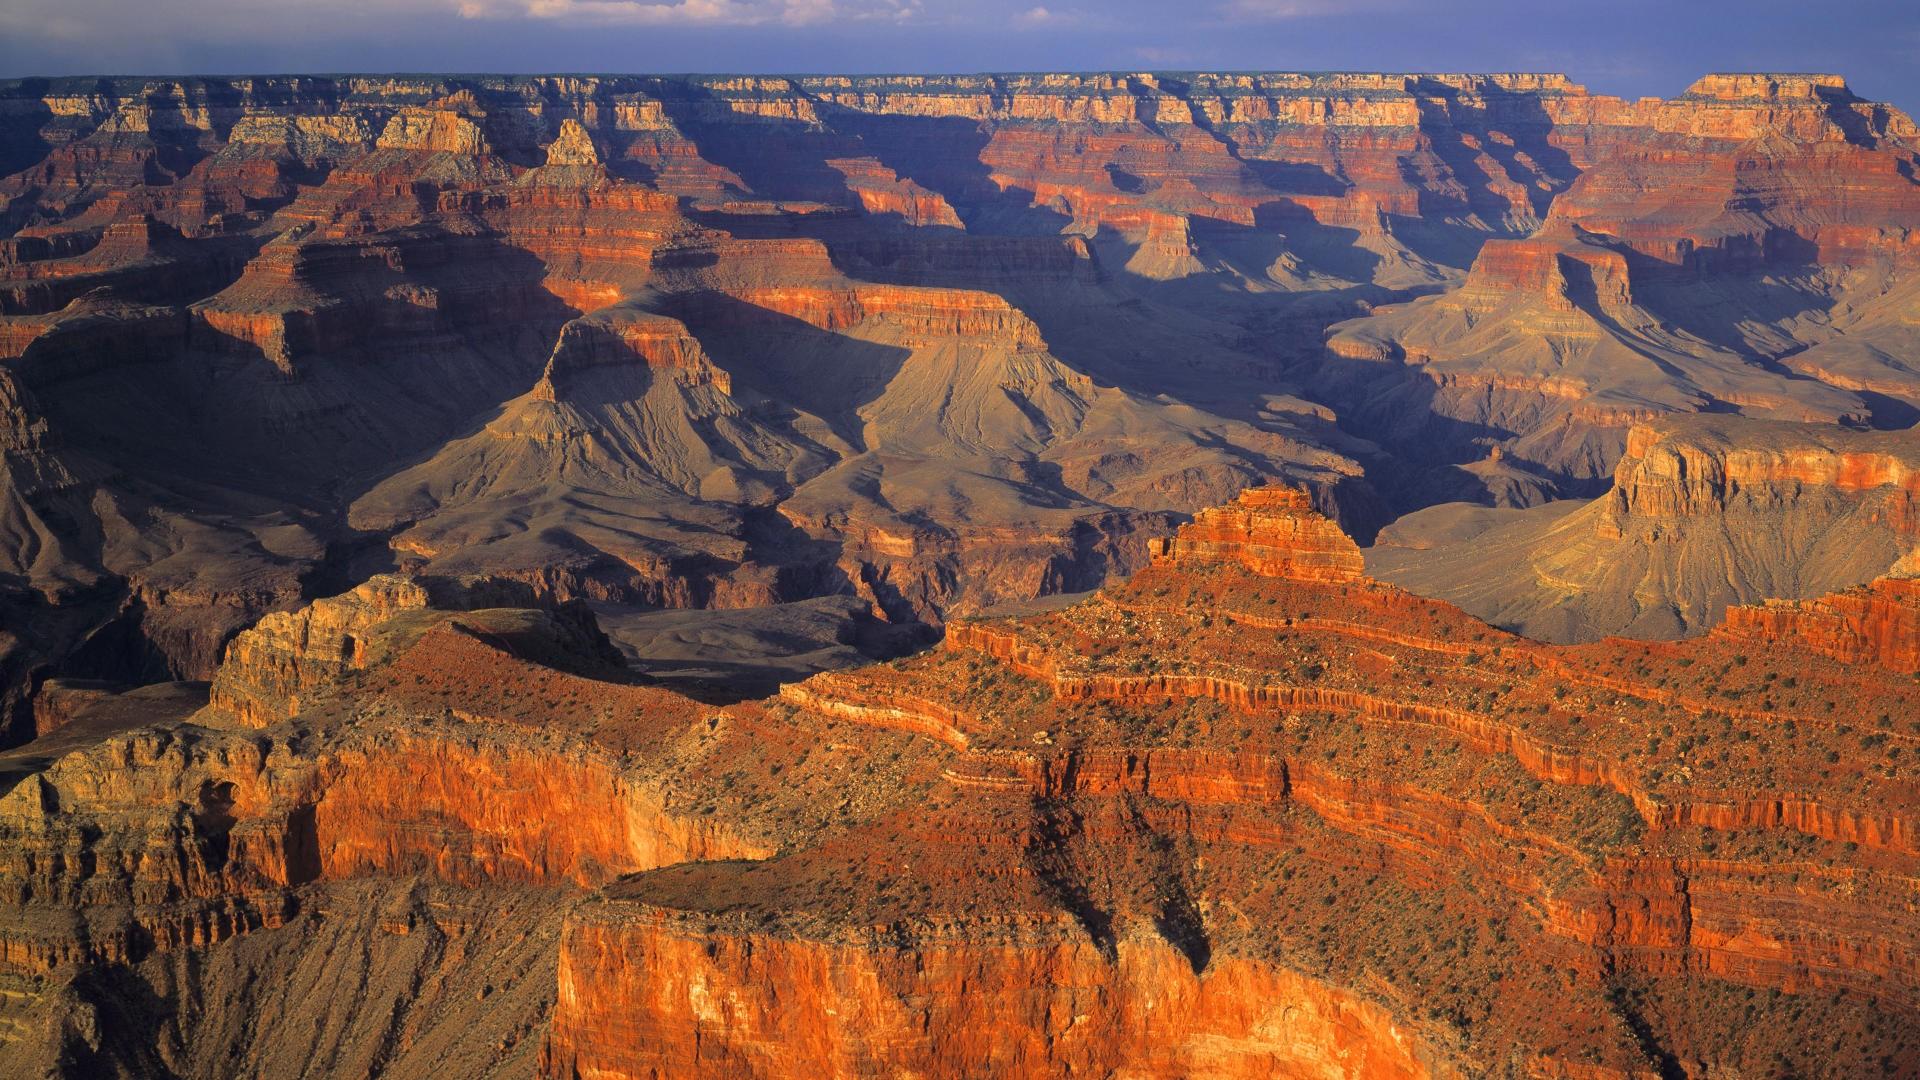 High Quality Creative Grand Canyon Wallpaper National Geographic